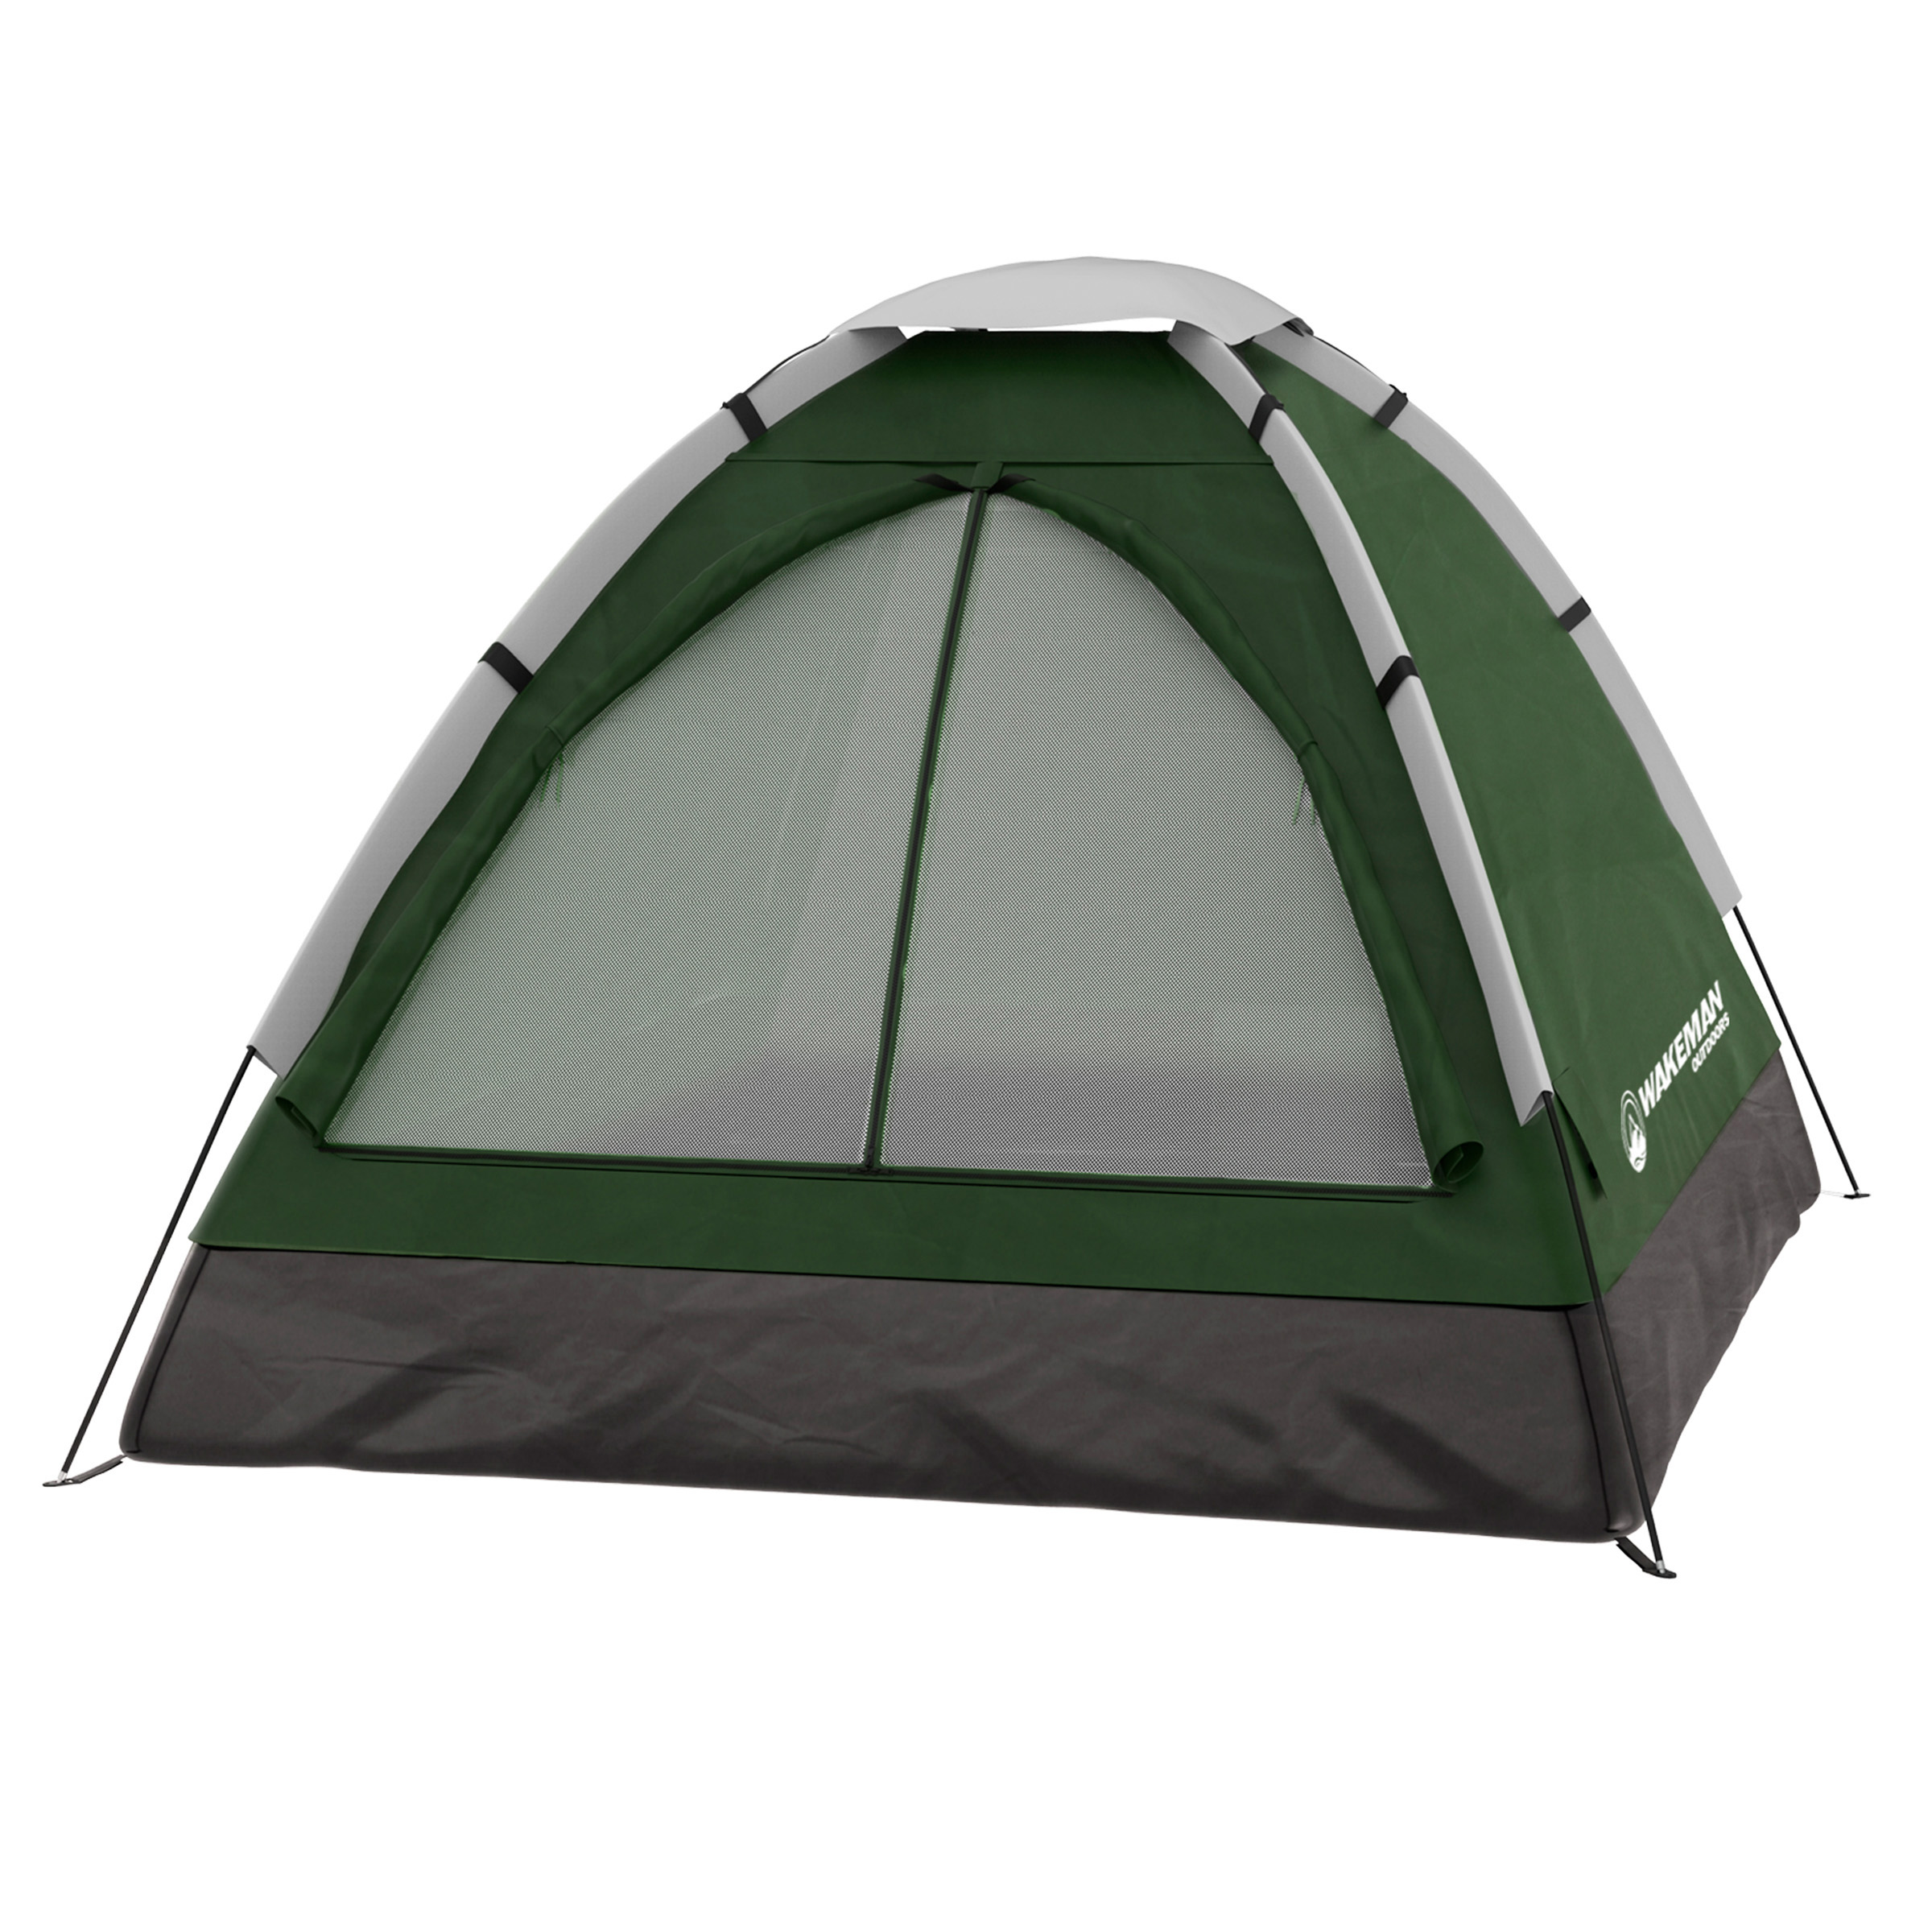 2-Person Dome Tent- Rain Fly & Carry Bag- Easy Set Up-Great for Camping, Backpacking, Hiking & Outdoor Music Festivals by Wakeman Outdoors - image 1 of 8